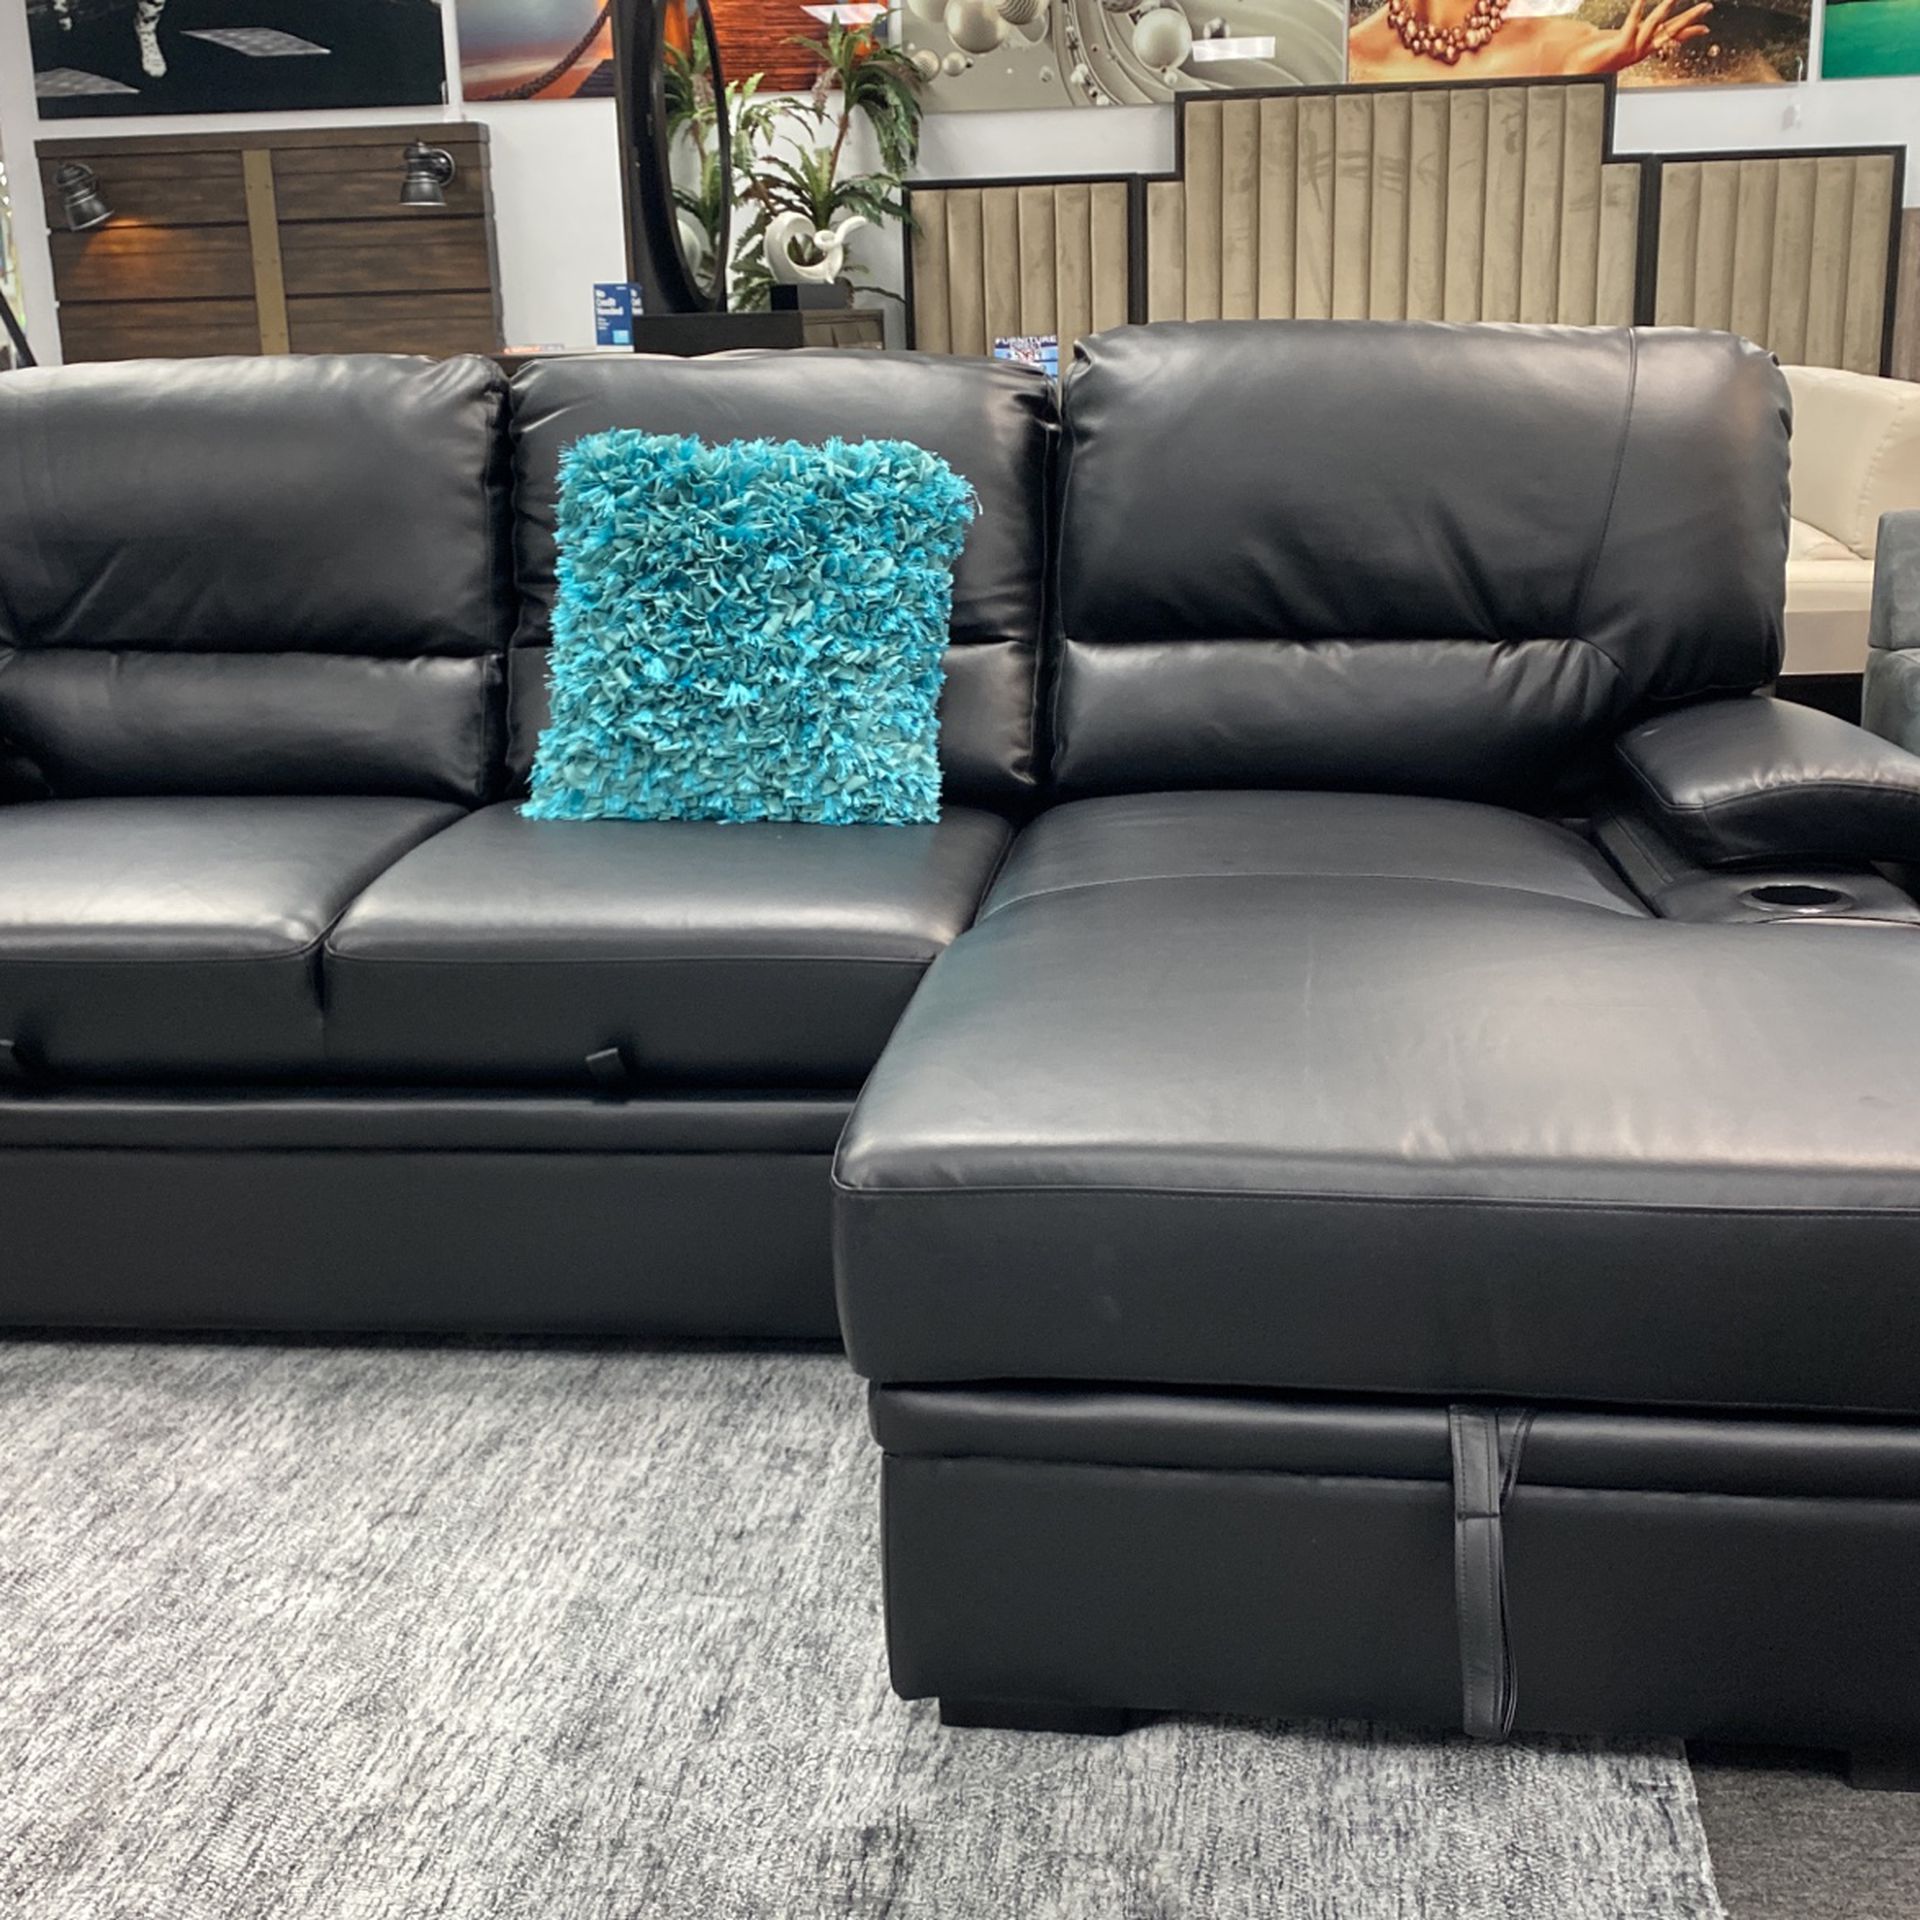 Gorgeous Sleeper Sectional With Storage And Cupholders!!